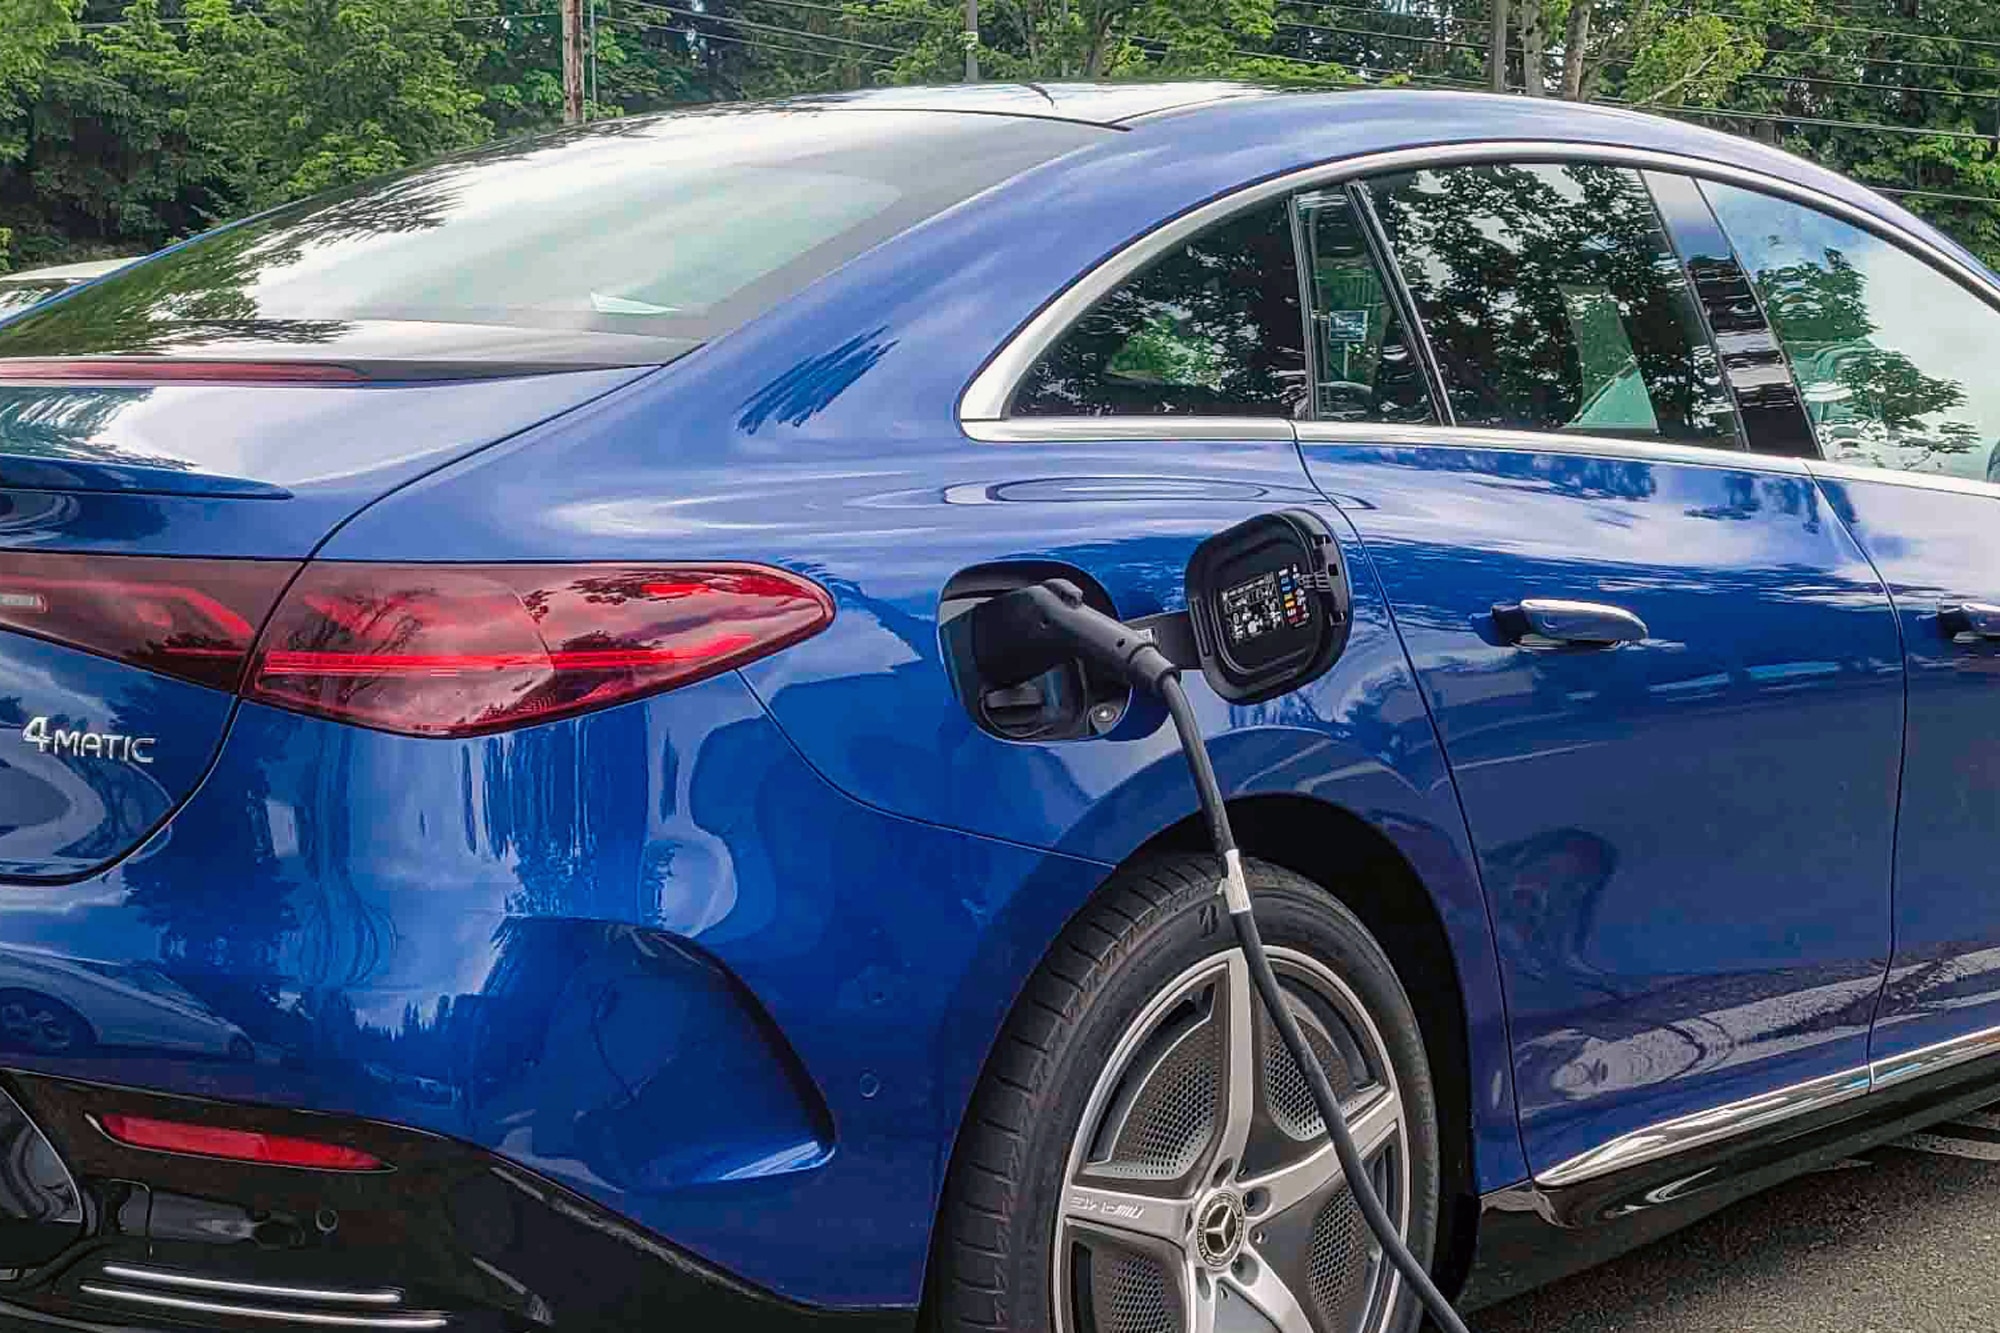 2023 Mercedes-Benz EQE Sedan in Starling Blue plugged in and charging